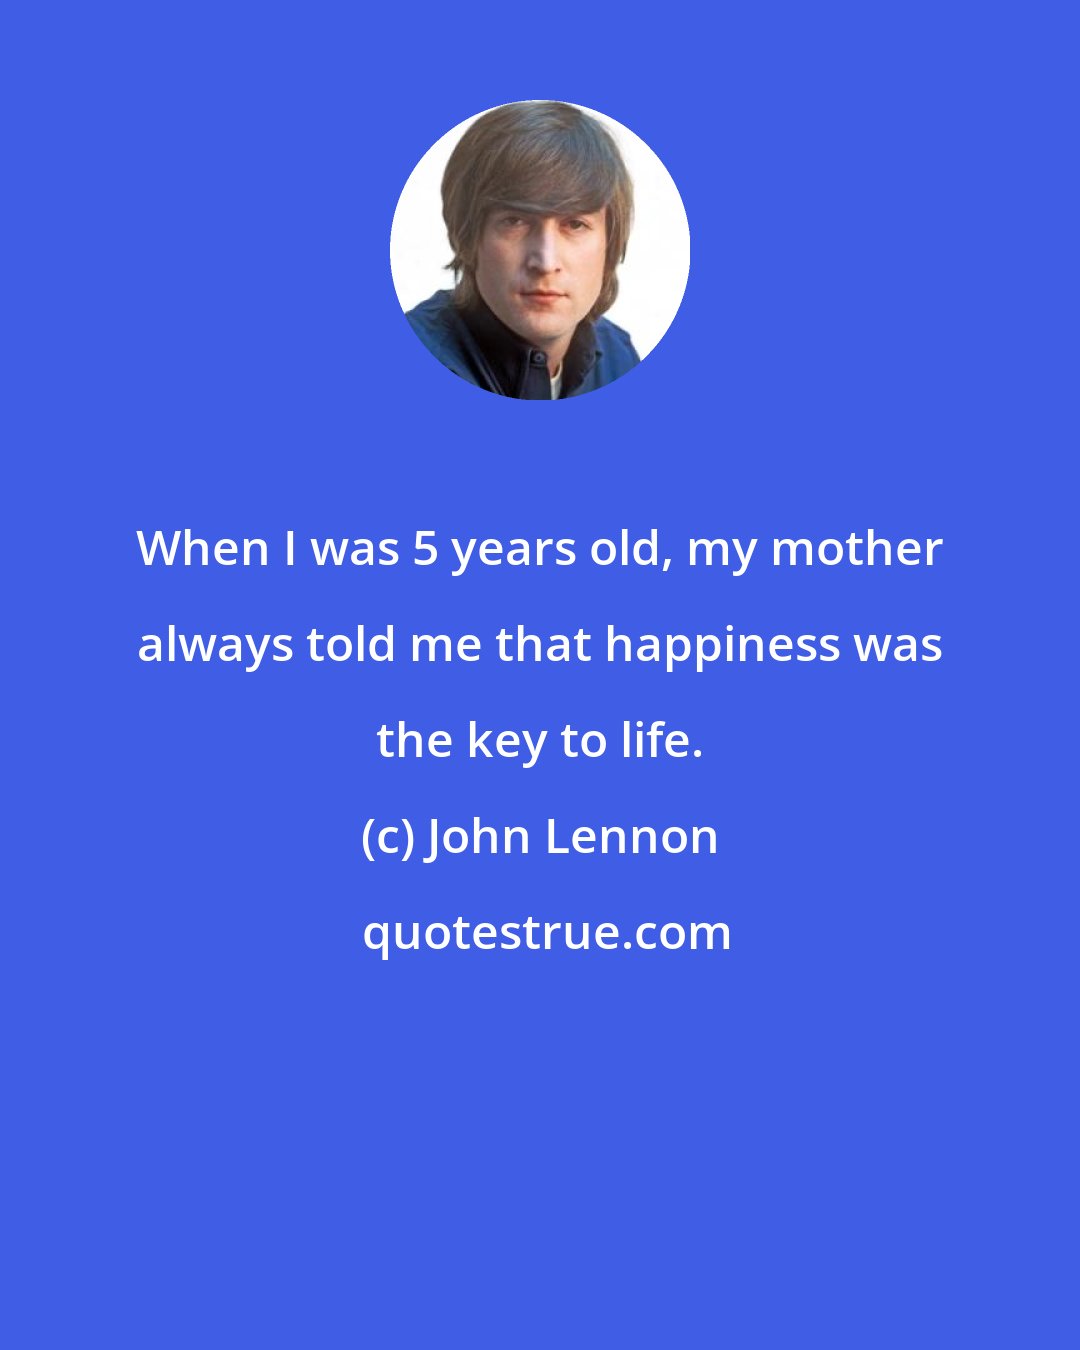 John Lennon: When I was 5 years old, my mother always told me that happiness was the key to life.